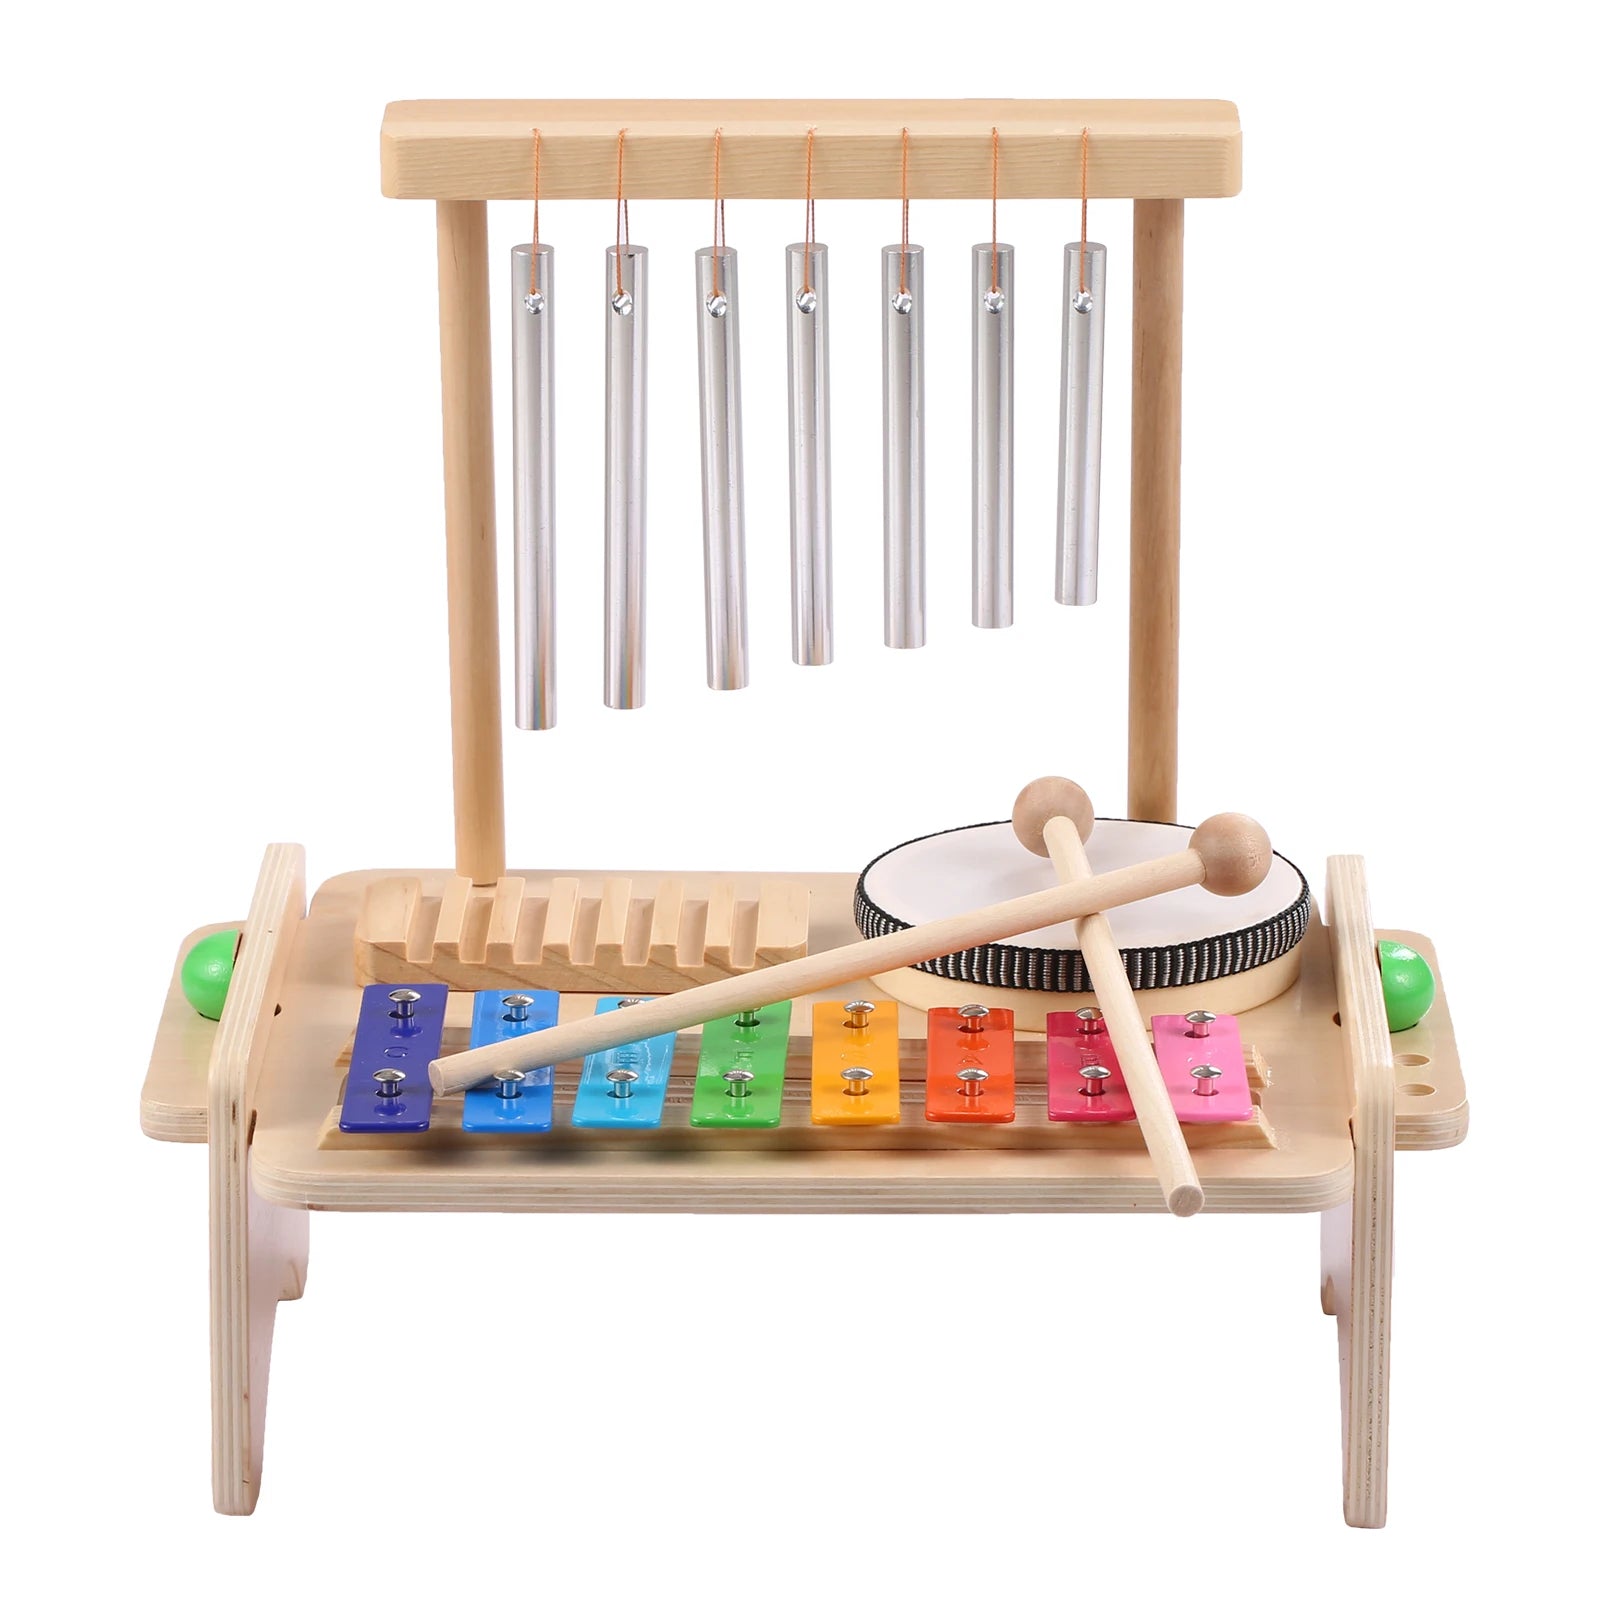 Kids Musical Instrument Set - 4-in-1 Drum, Xylophone, Wind Chime, and Scraper Musical Toy Baby Stork 